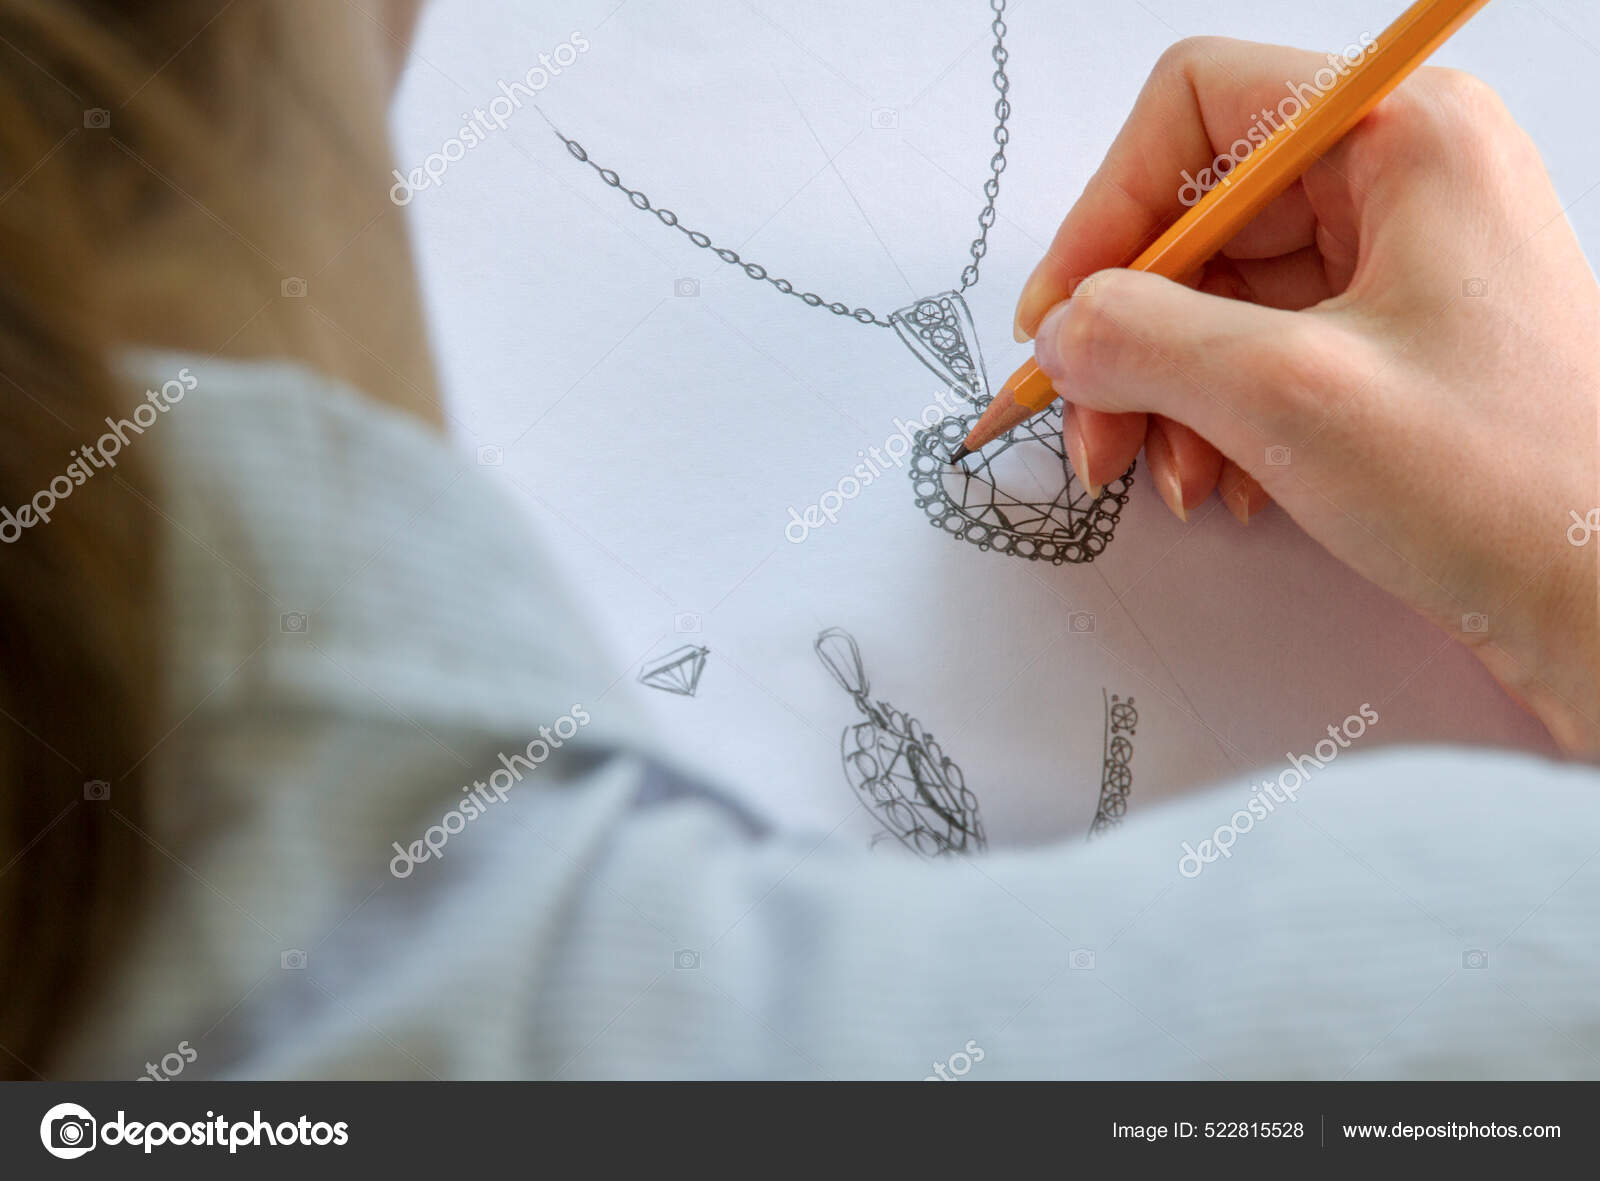 Drawing Jewelry Design Artist Designer Drawing Sketch Jewelry Paper Design  Stock Photo by ©notistia 328194394